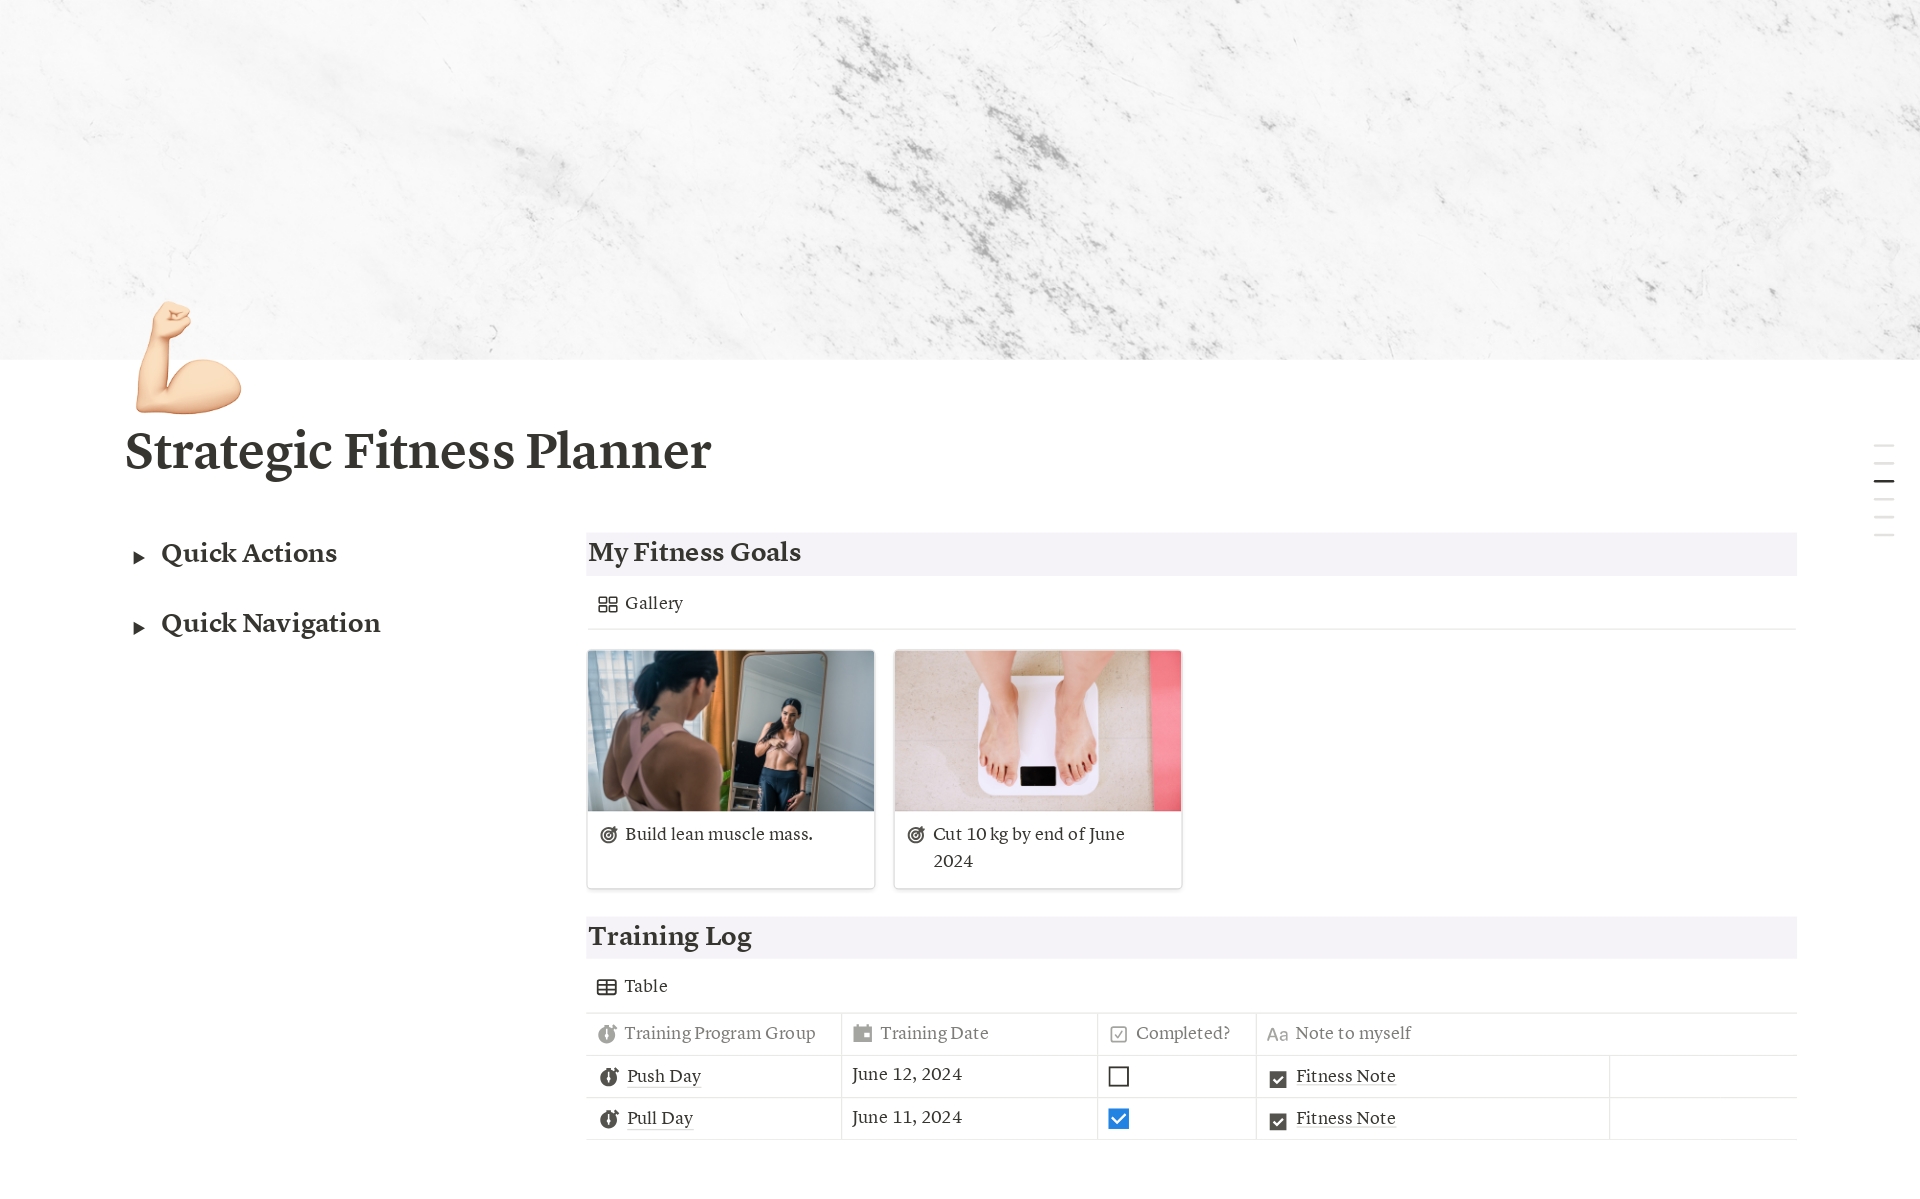 Become better at maintaining your fitness

This pre-made Strategic Fitness Planner Notion template is designed to help you monitor your fitness performance as well as plan your nutrition meals ahead